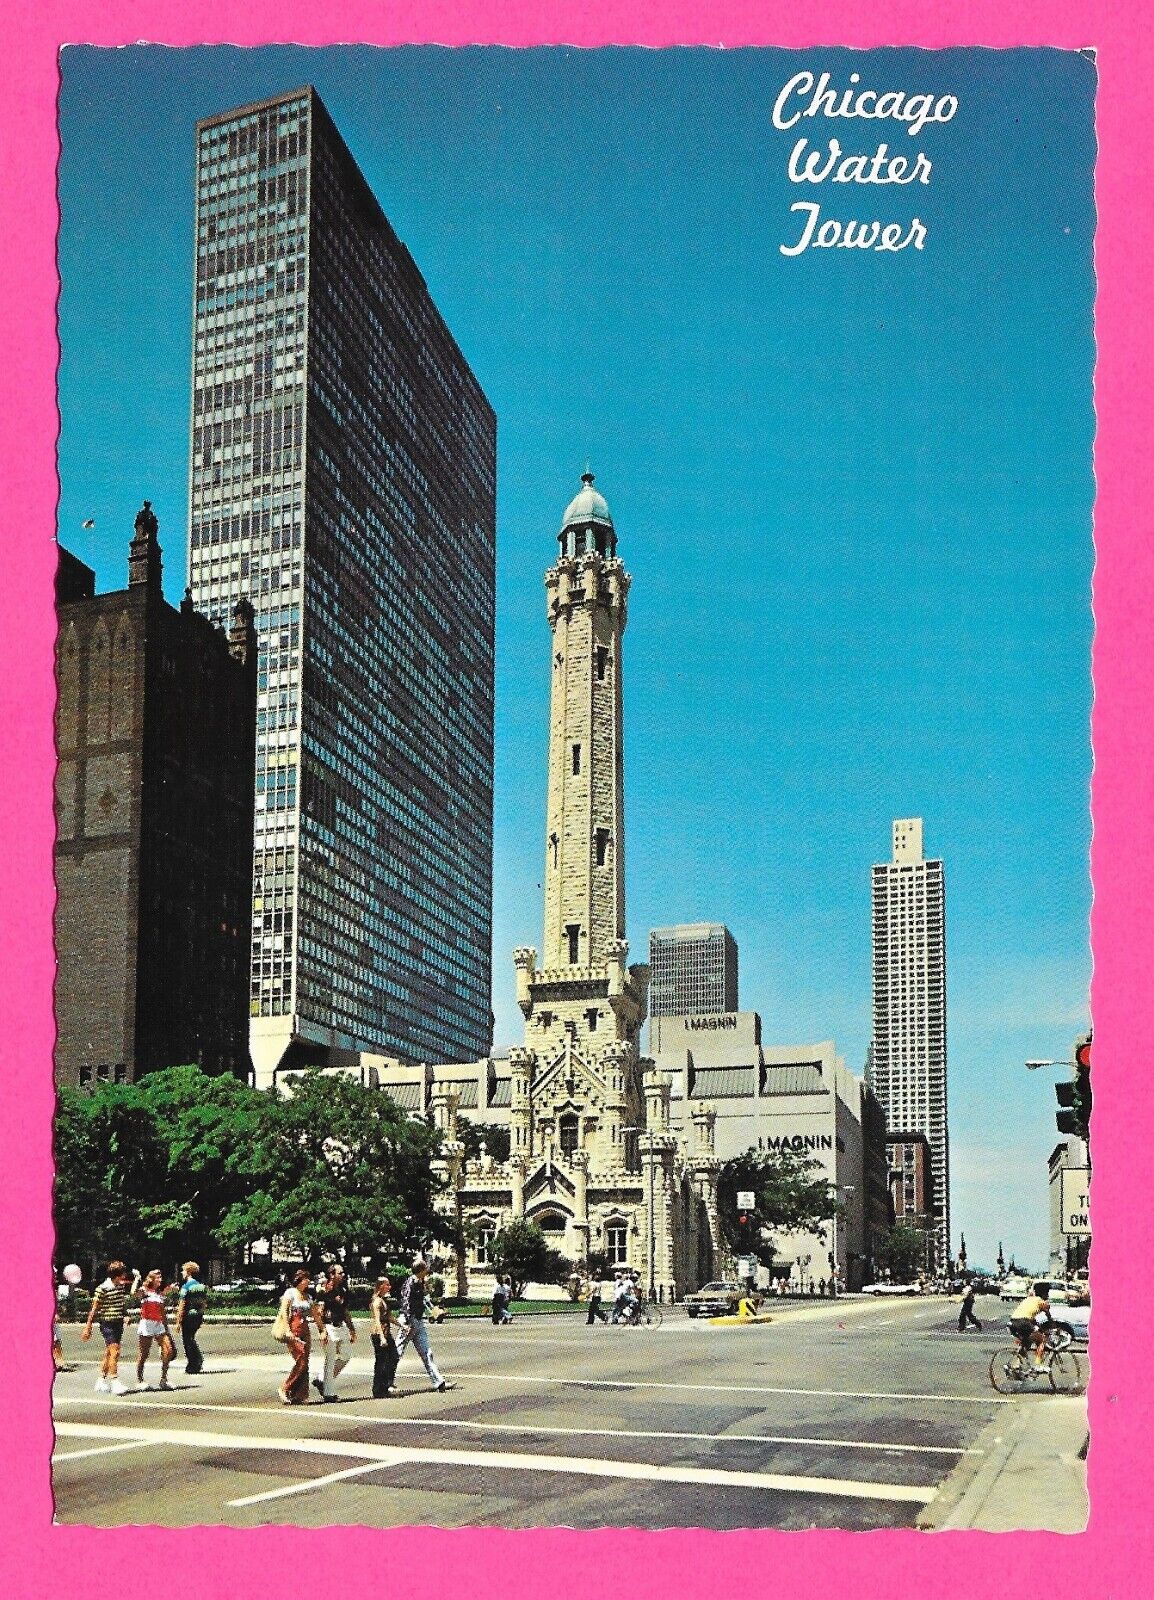 Chicago Water Tower, Chicago, Illinois Post Card